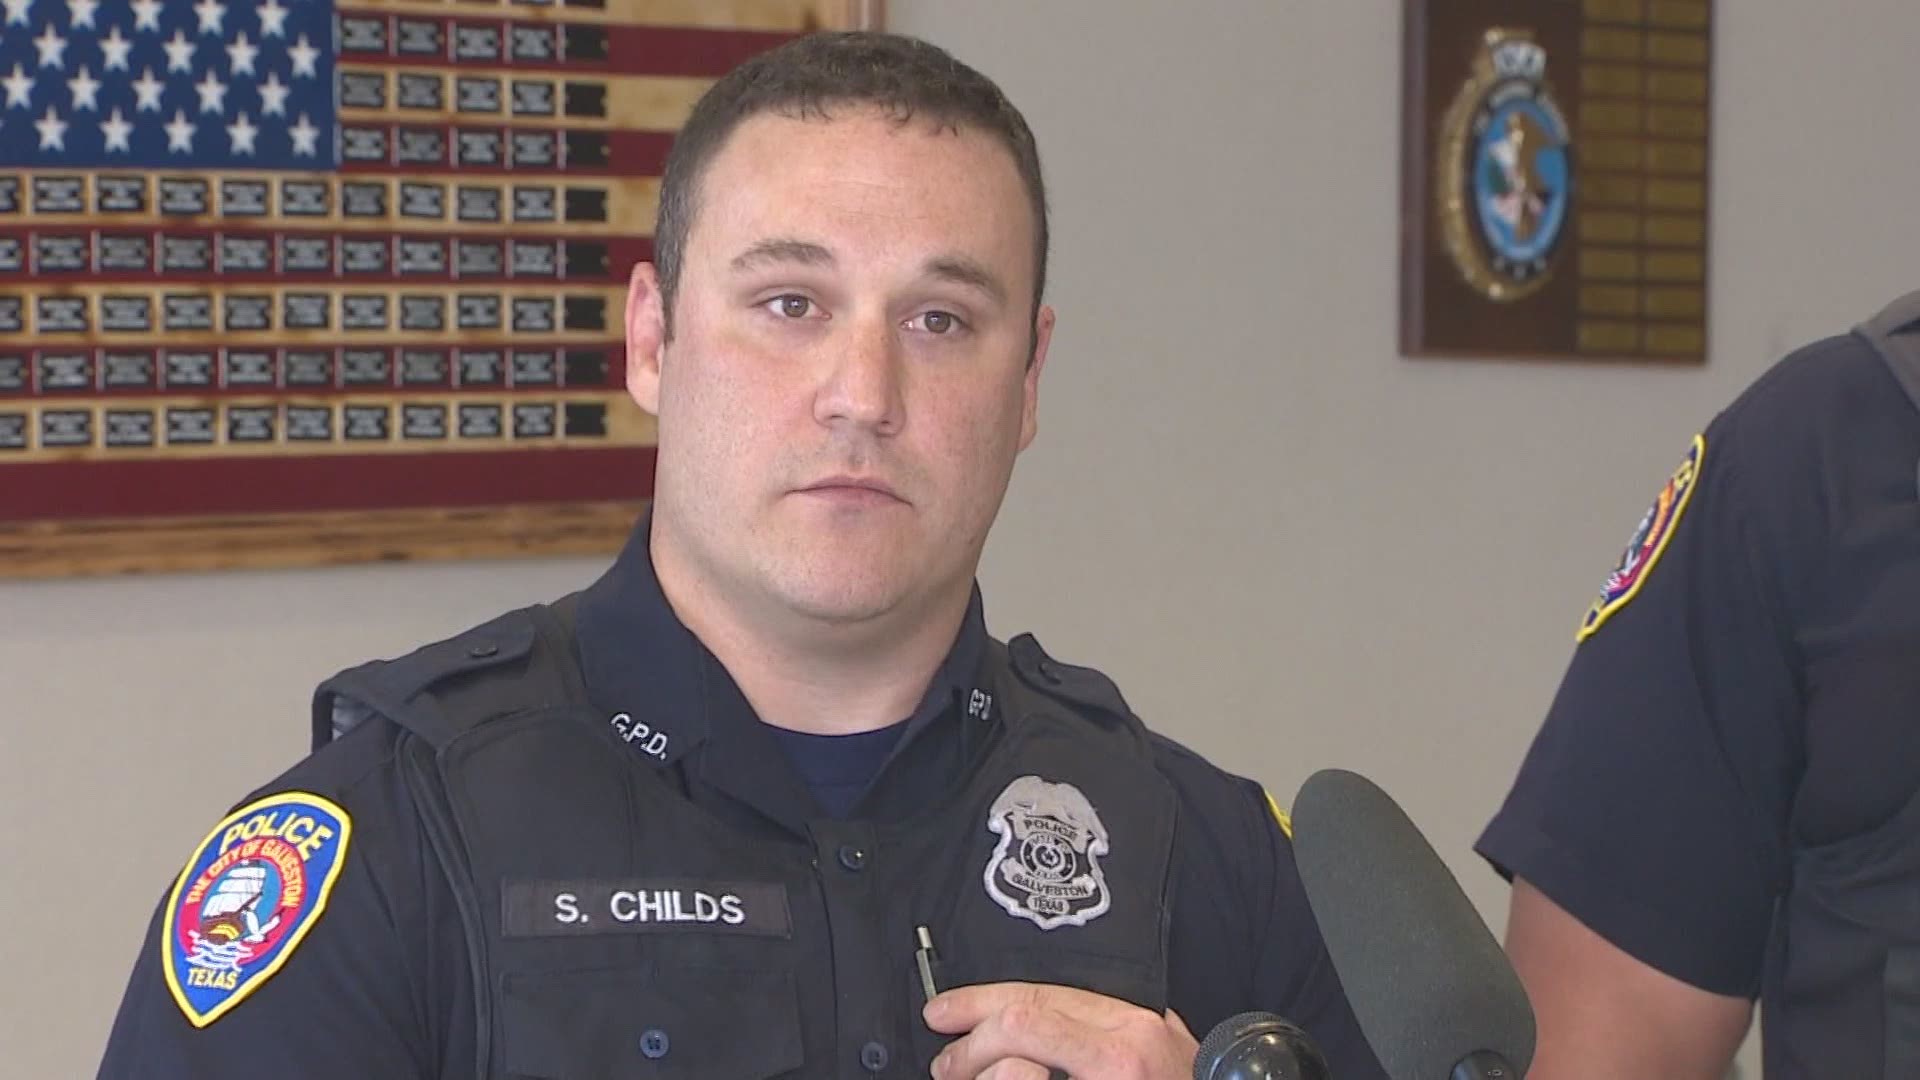 Two Galveston Police officers are being hailed as heroes after rescuing an alleged kidnapping victim who was five and a half months pregnant.